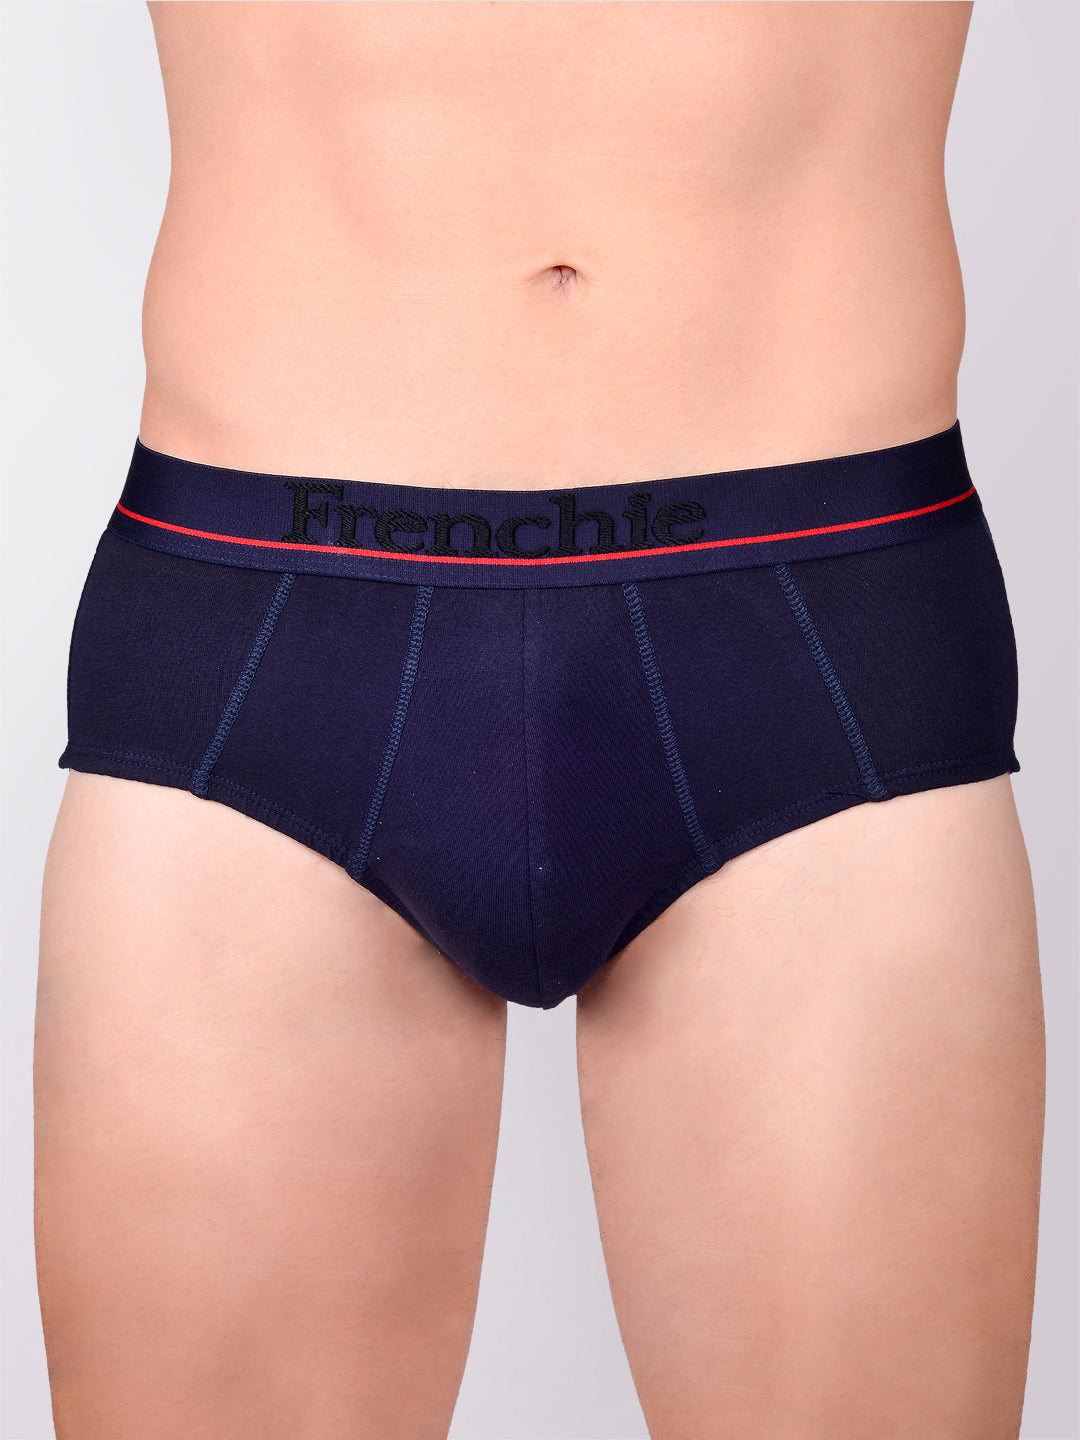 Casuals 4003 - Soft Cotton Solid Mini Trunks for Men - Assorted Colors